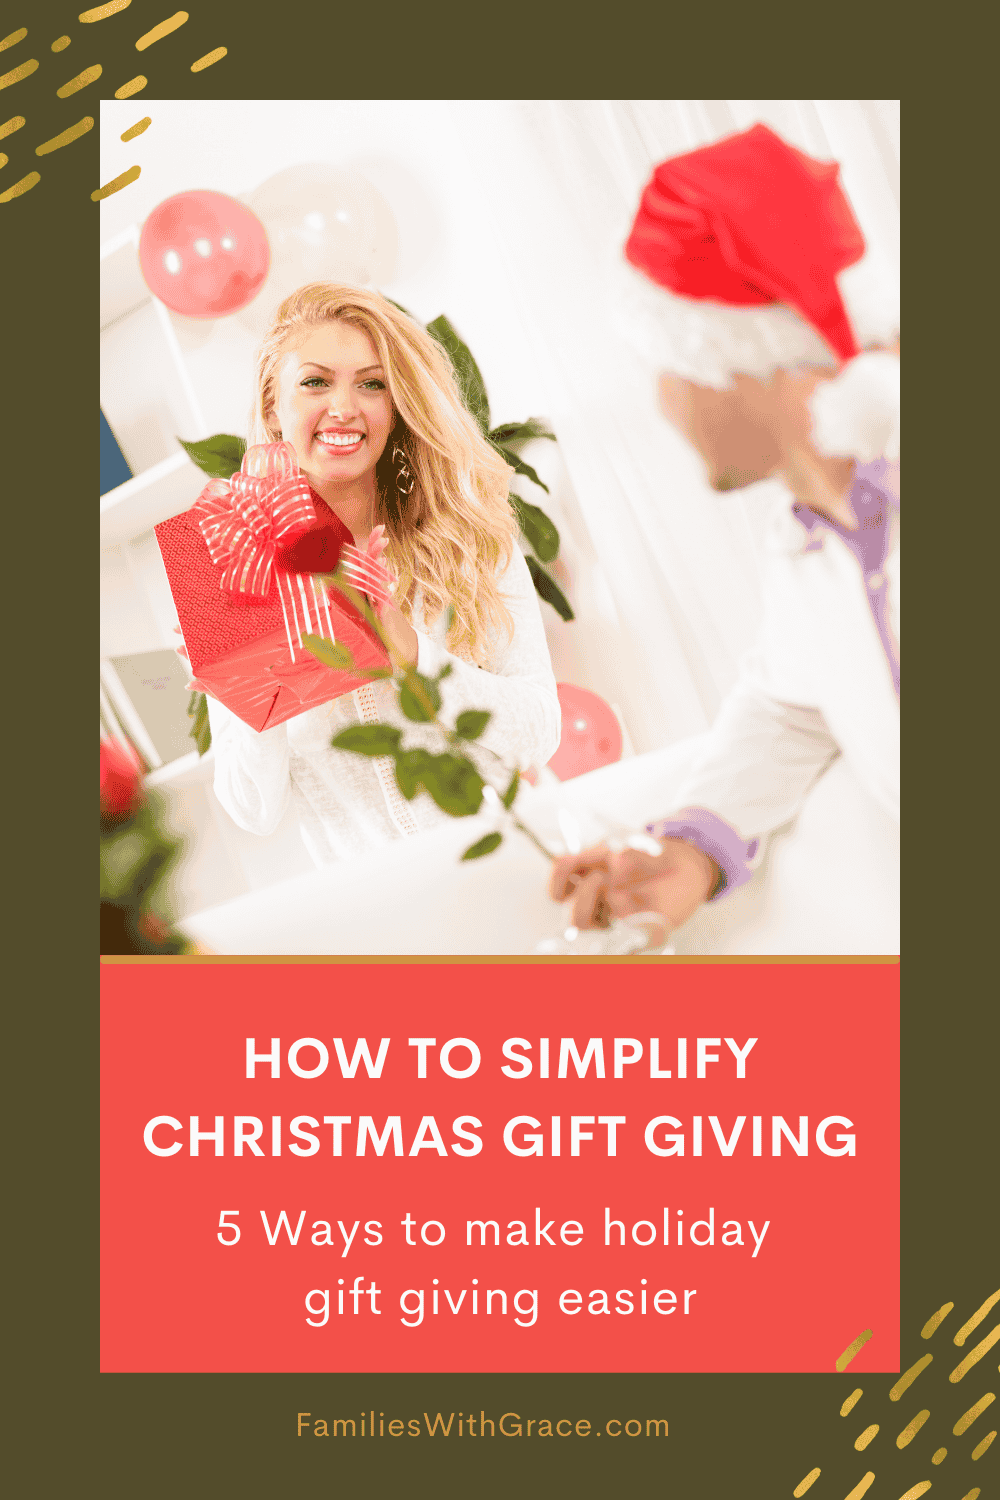 How to simplify Christmas gift giving